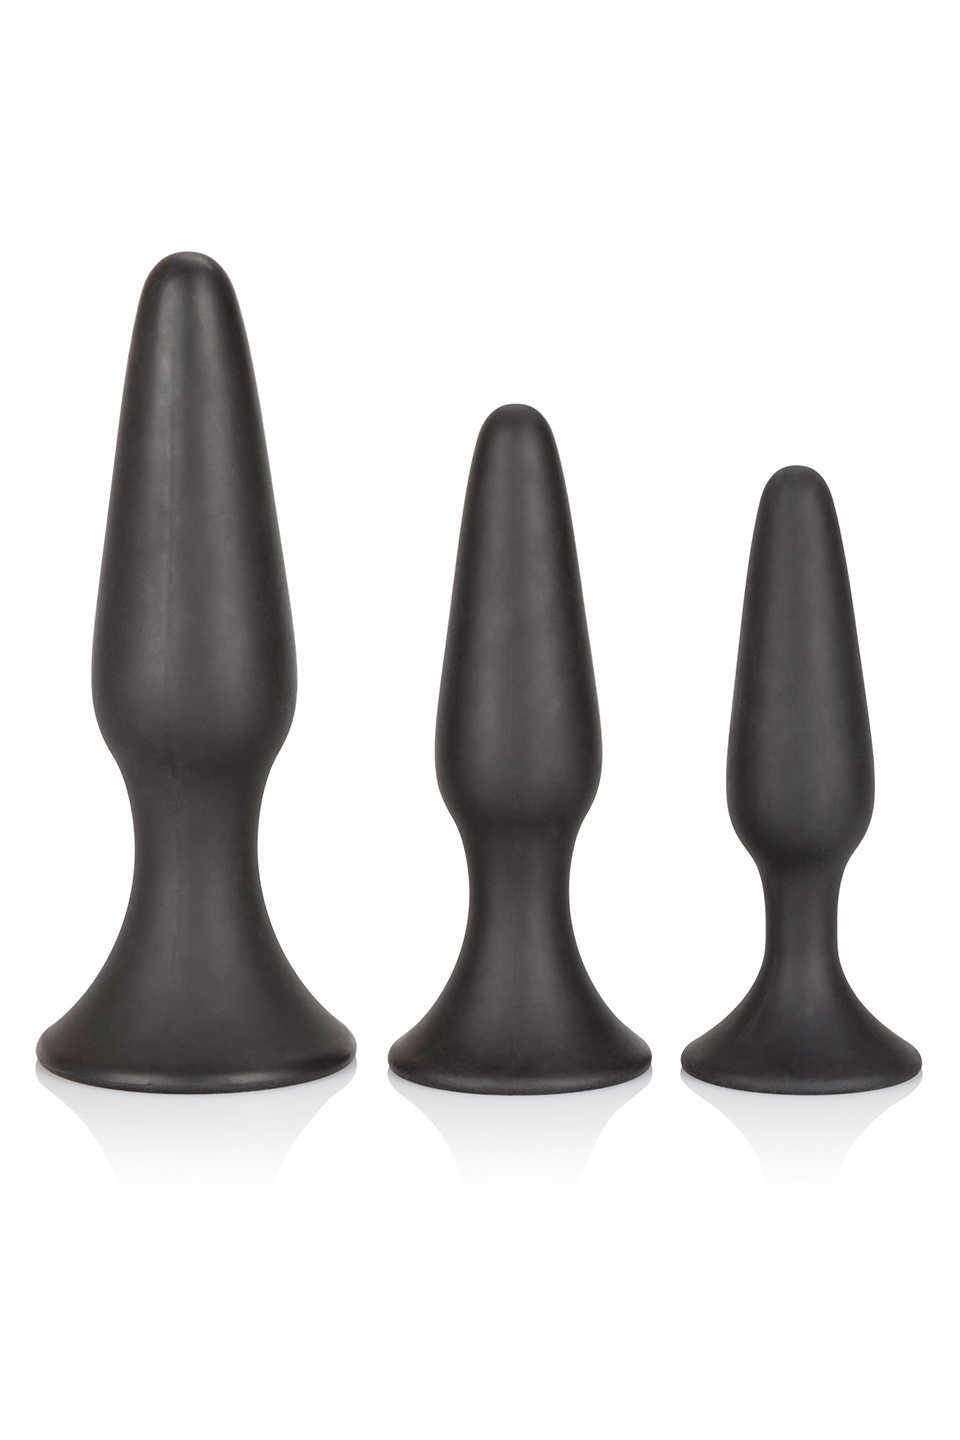 CEN 3 Buttplugs: Anal Trainer Kit